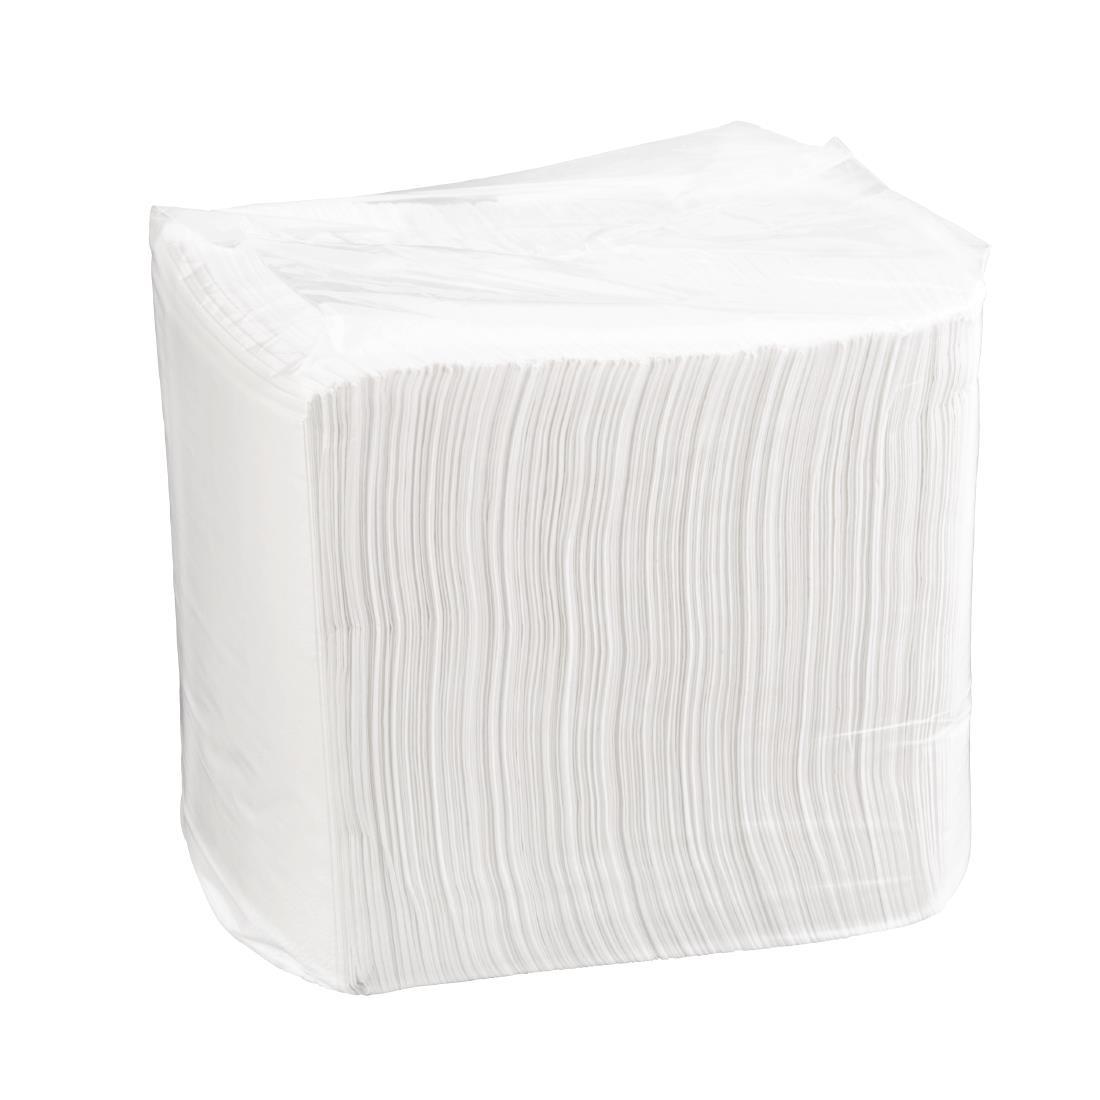 Fiesta Recyclable Lunch Napkin White 30x30cm 2ply 1/4 Fold (Pack of 2000) - CM562  - 7